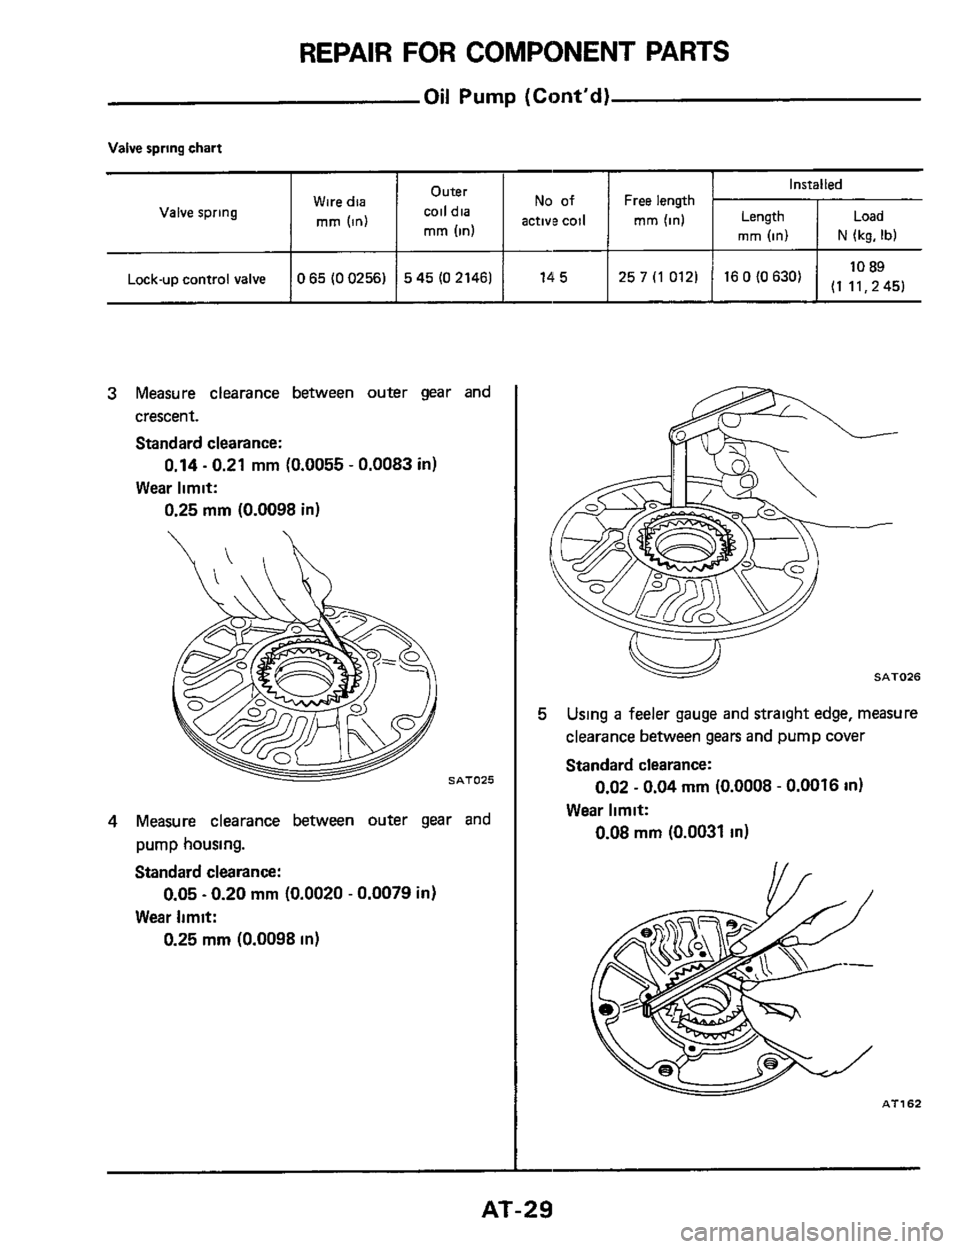 NISSAN 300ZX 1984 Z31 Automatic Transmission Owners Manual REPAIR FOR COMPONENT PARTS 
No of 
active coil 
Outer 
coil dia 
rnrn (in) 
Wire dia 
rnrn (in) Valve  spring 
Oil Pump (Cont’d) 
Valve  spring  chart 
Installed 
Length 
rnrn (in) N (kg. Ib) 
Free 